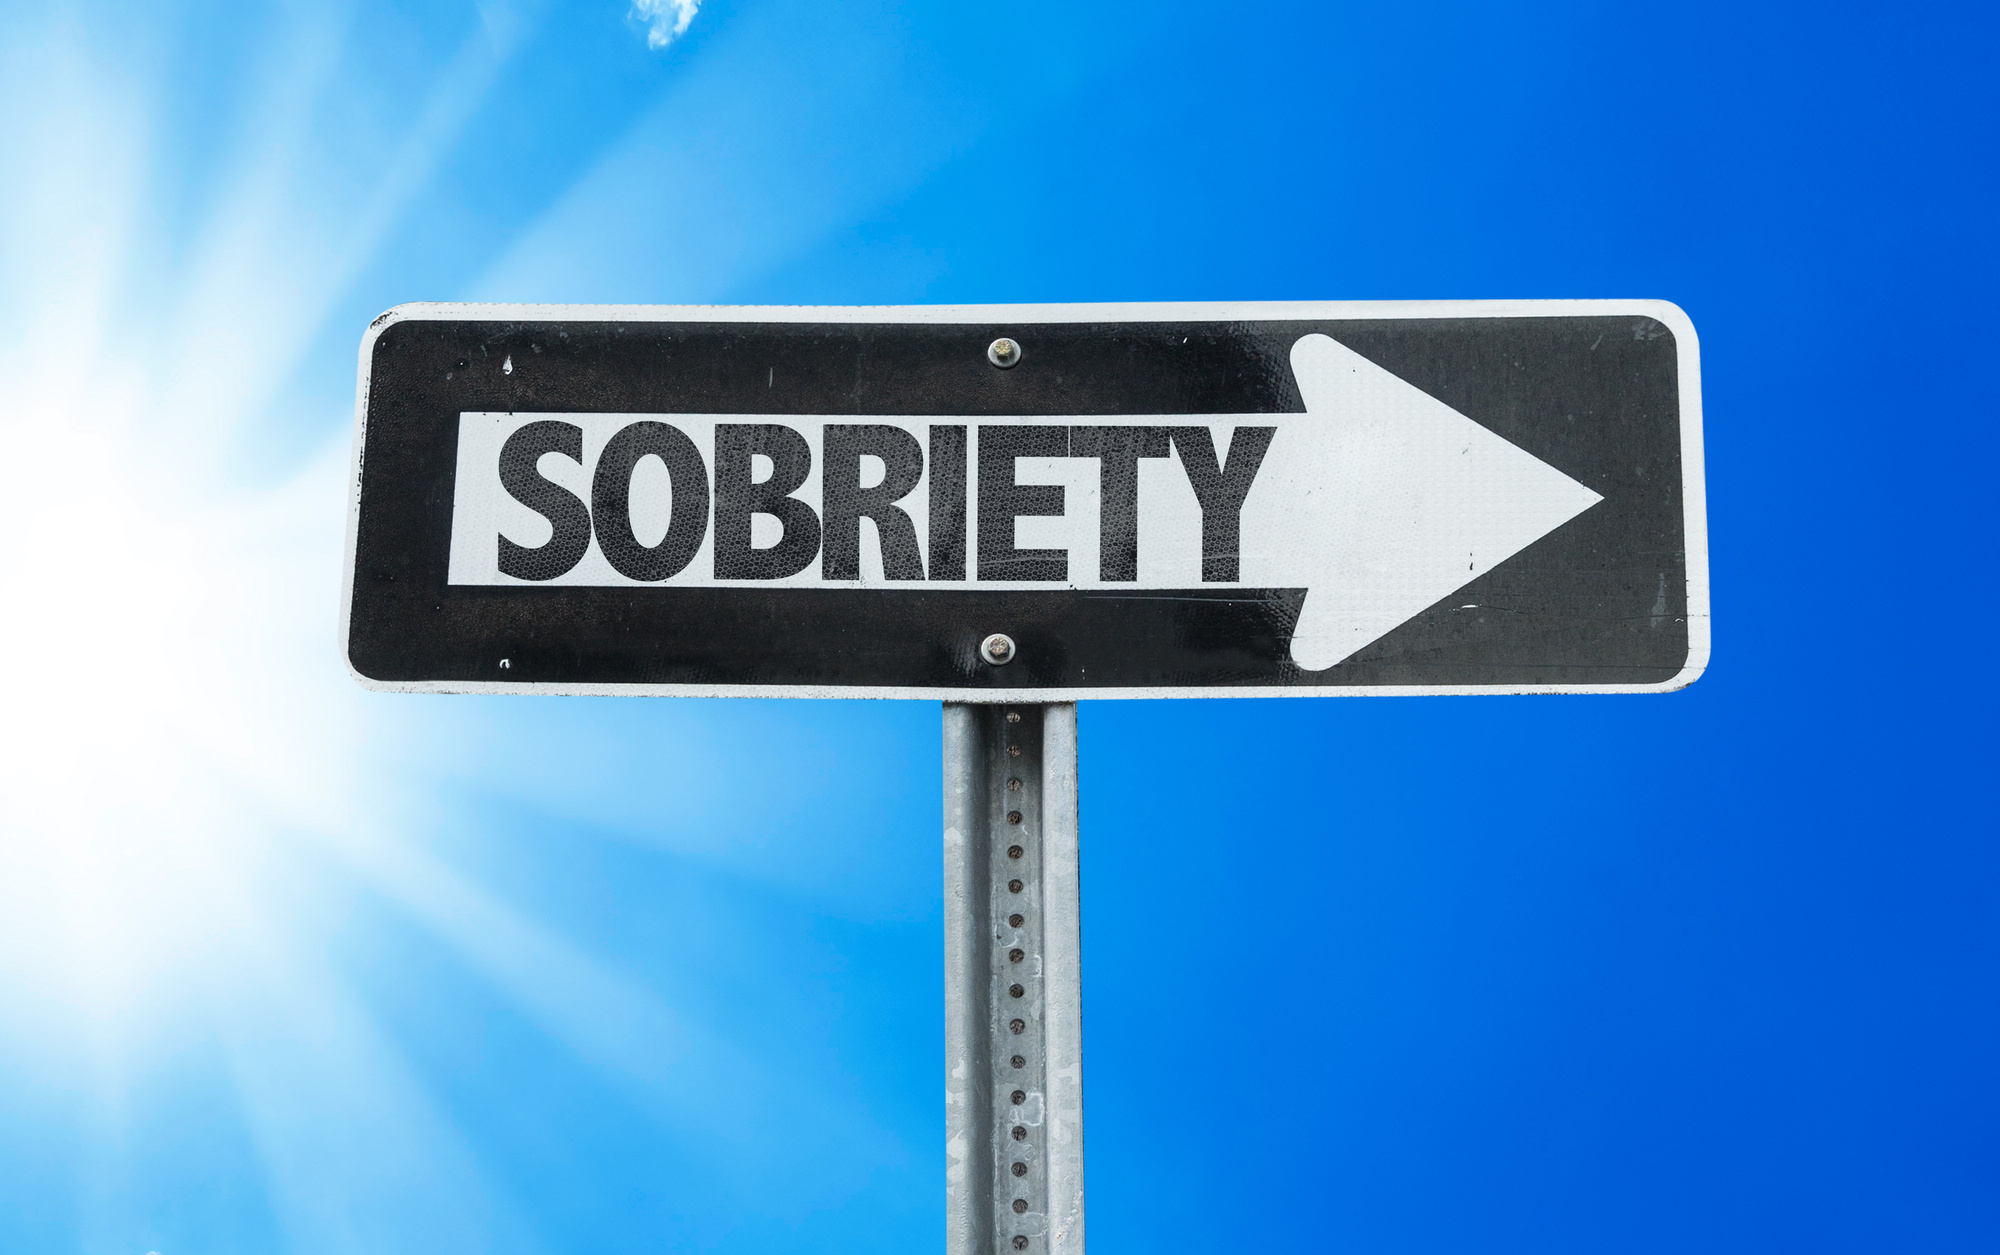 There are several reasons for living a sober life. Learn more about the awesome benefits of sobriety by checking out this guide.